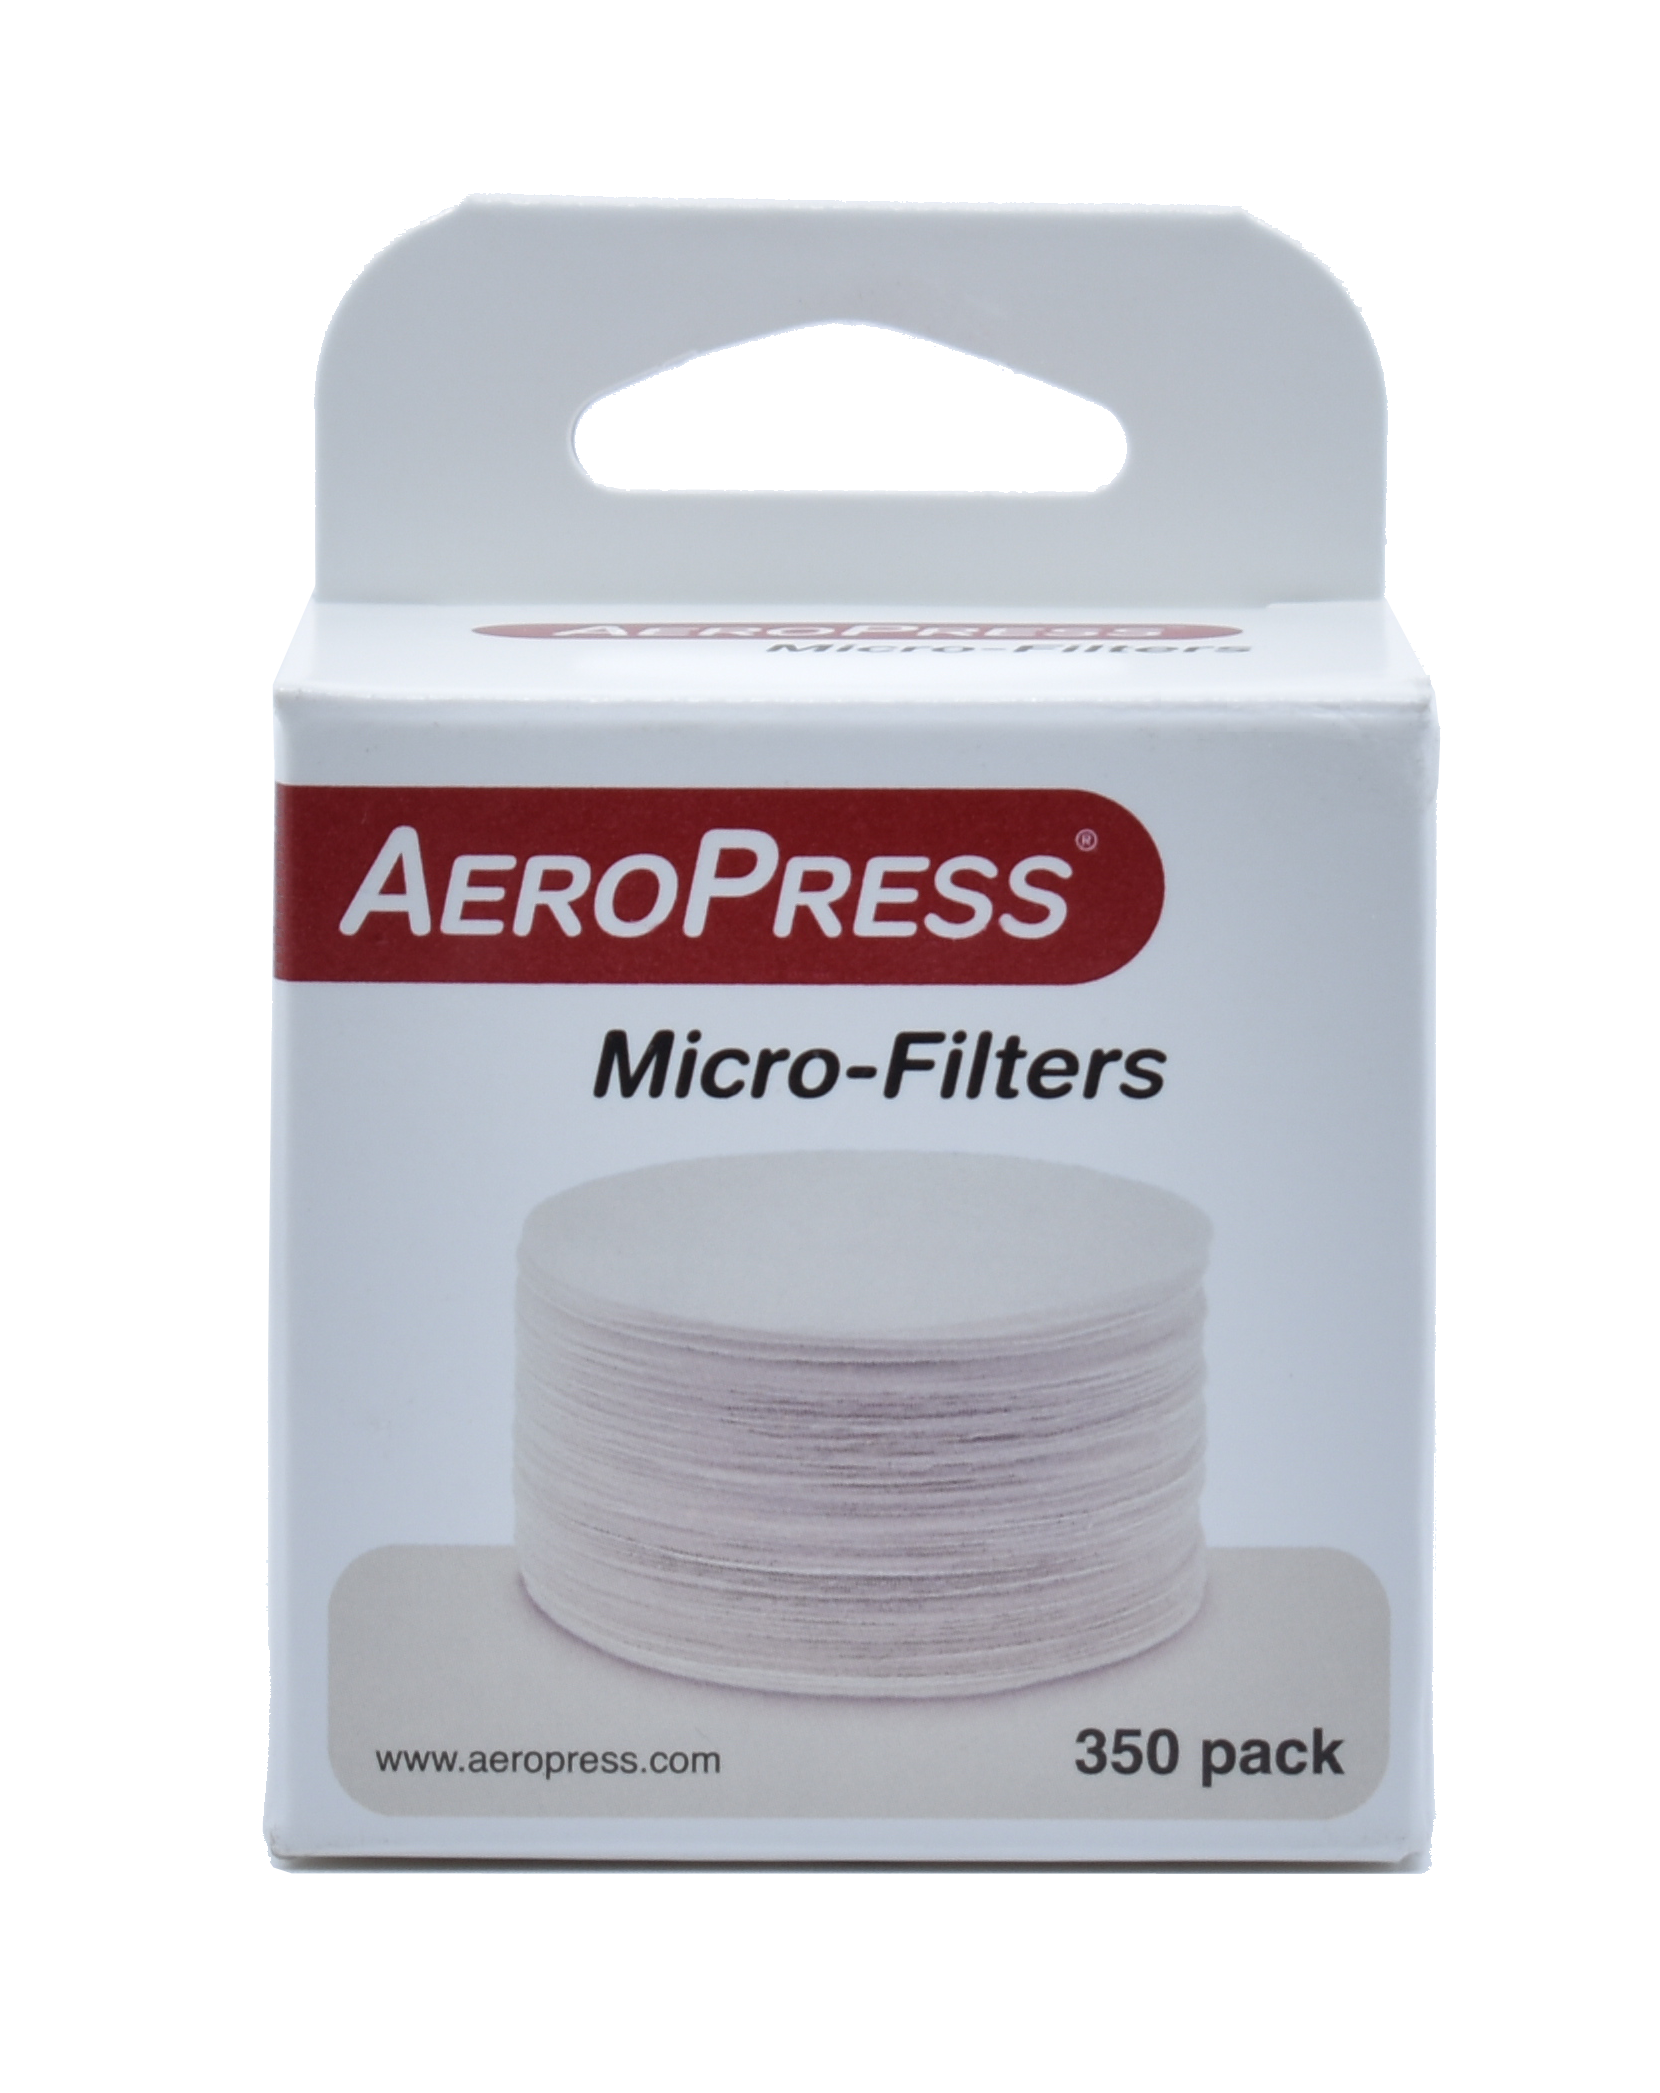 Aeropress Micro-filters Package Front View